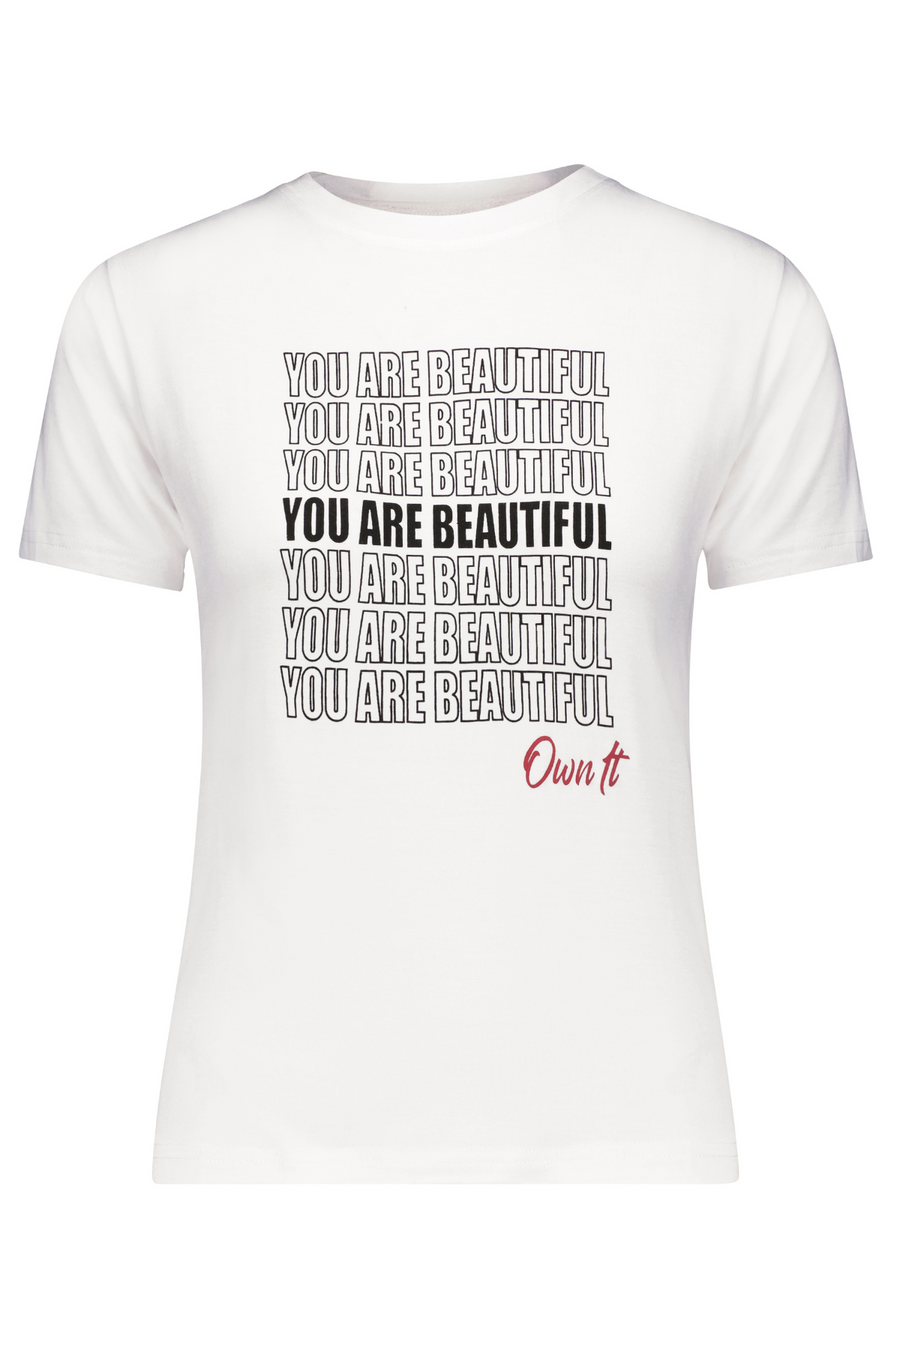 You're Beautiful Own It Cotton T-Shirt in White - Furkat & Robbie